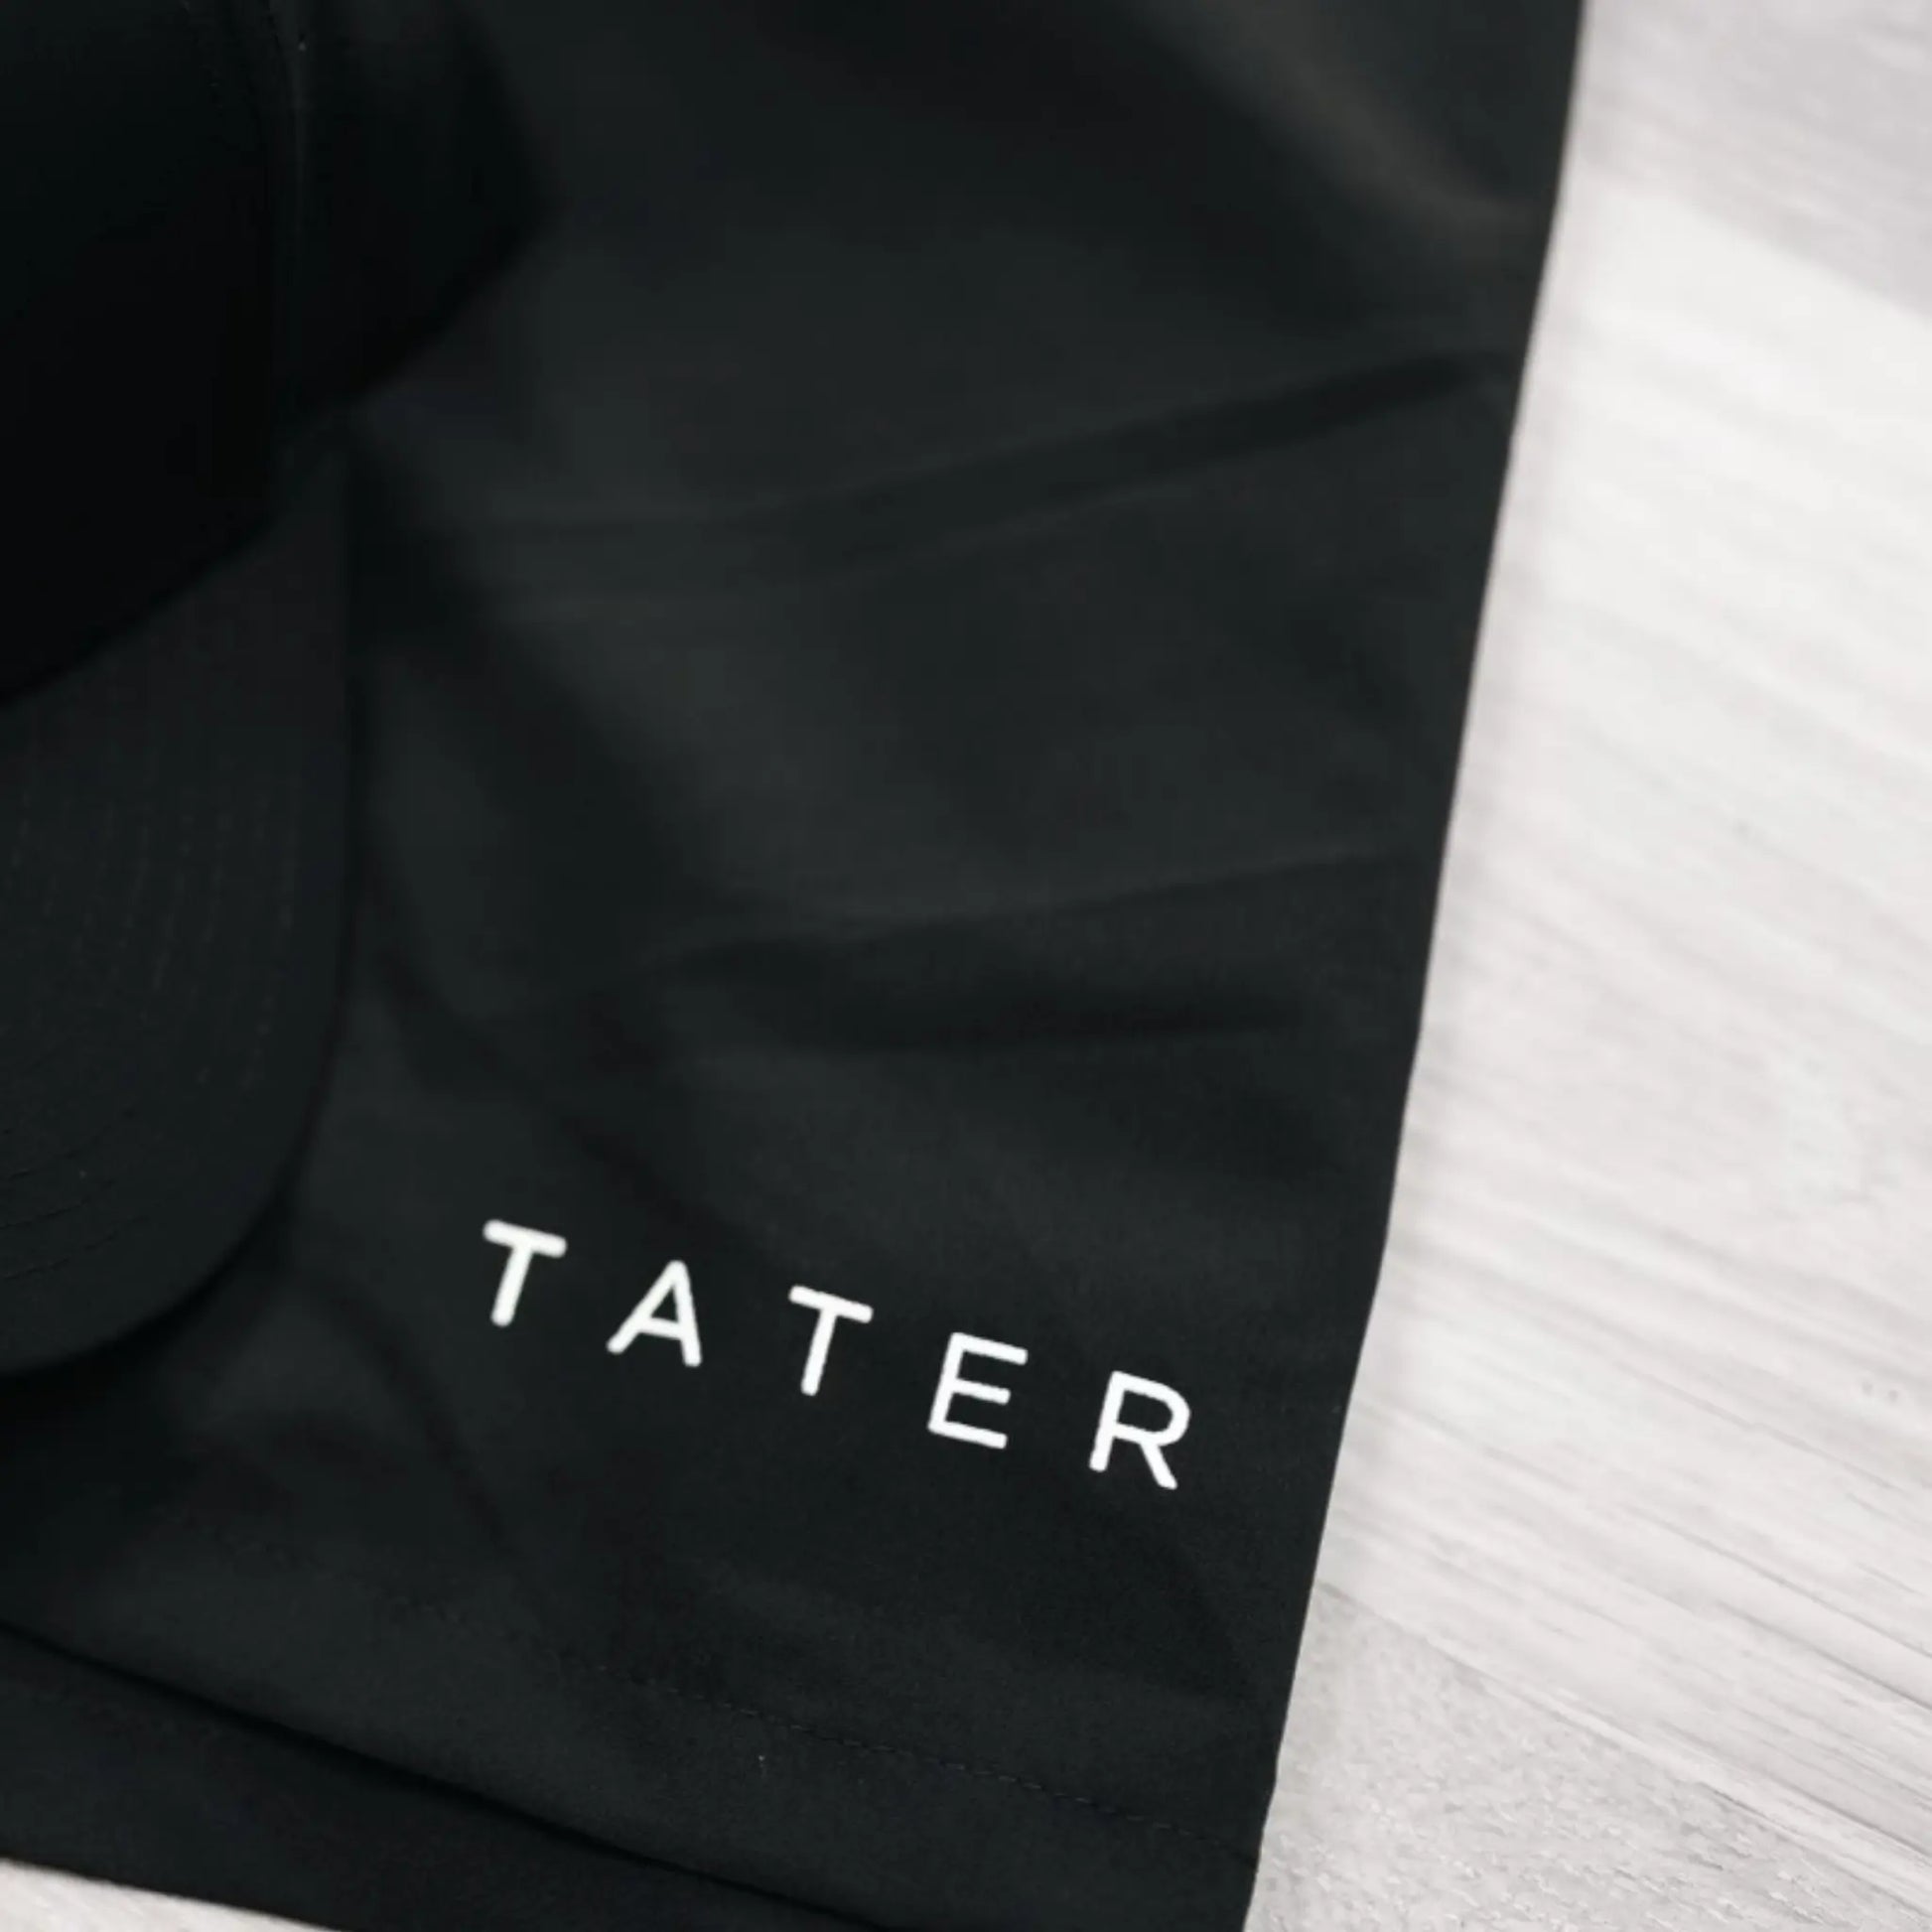  Image shows a close-up of black athletic shorts with the brand name "TATER" printed in white letters, likely indicating a focus on sports or fitness apparel. The material and design suggest that these shorts are made for active use, suitable for workouts, baseball practice, or casual wear. The branding is simple and elegant, which could appeal to consumers looking for stylish yet functional athletic wear.